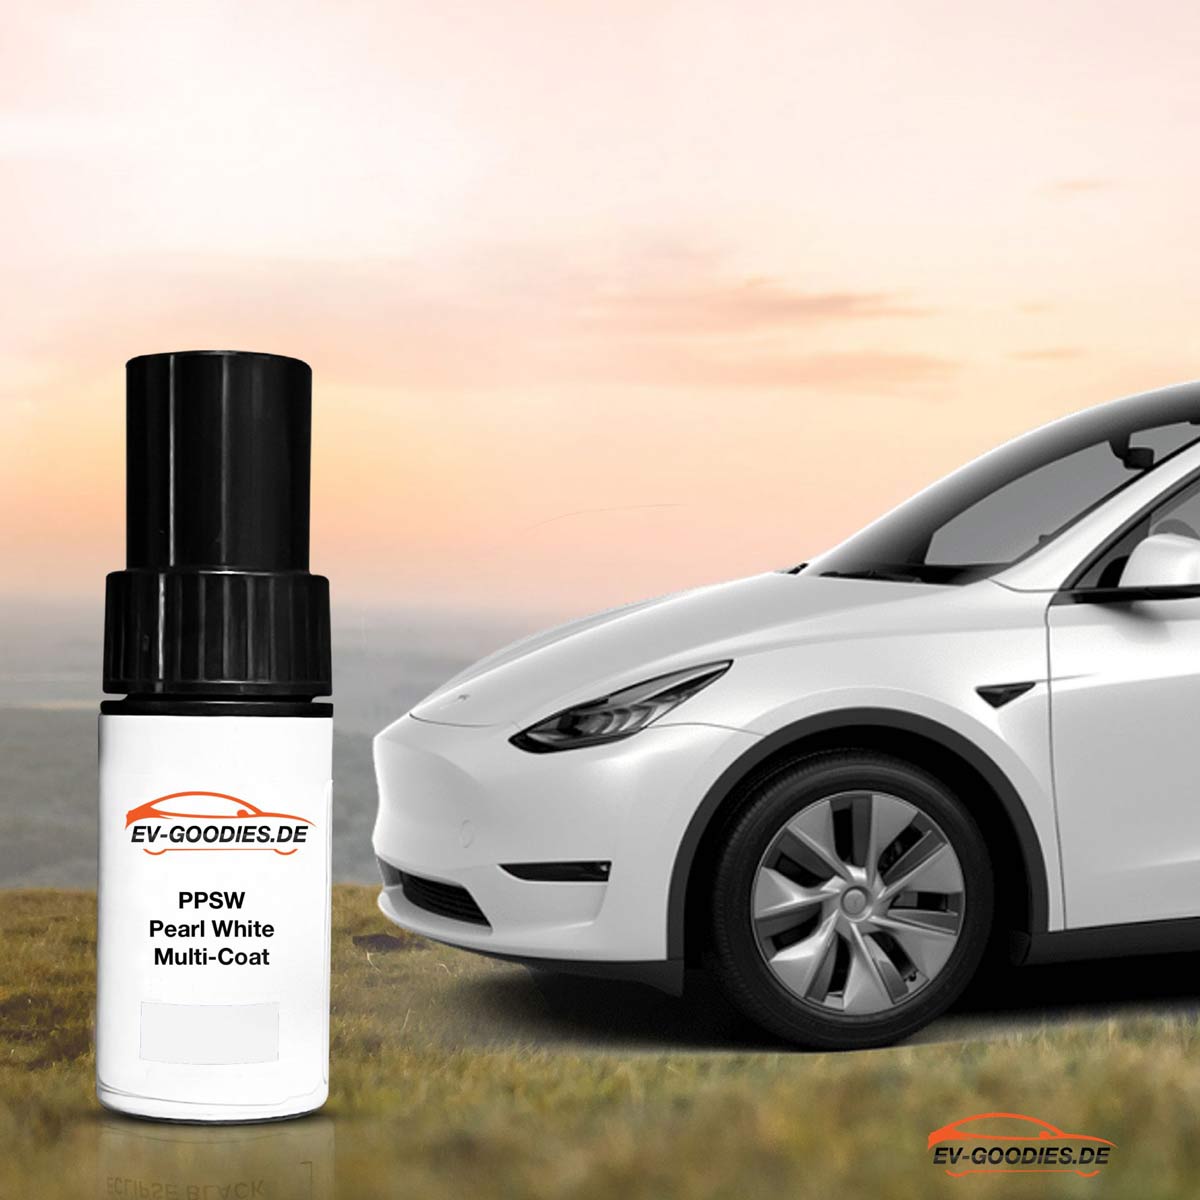 Paint brush white Pearl White Multi-Coat for Tesla Model Y, color code: PPSW, paint repair, stone chips